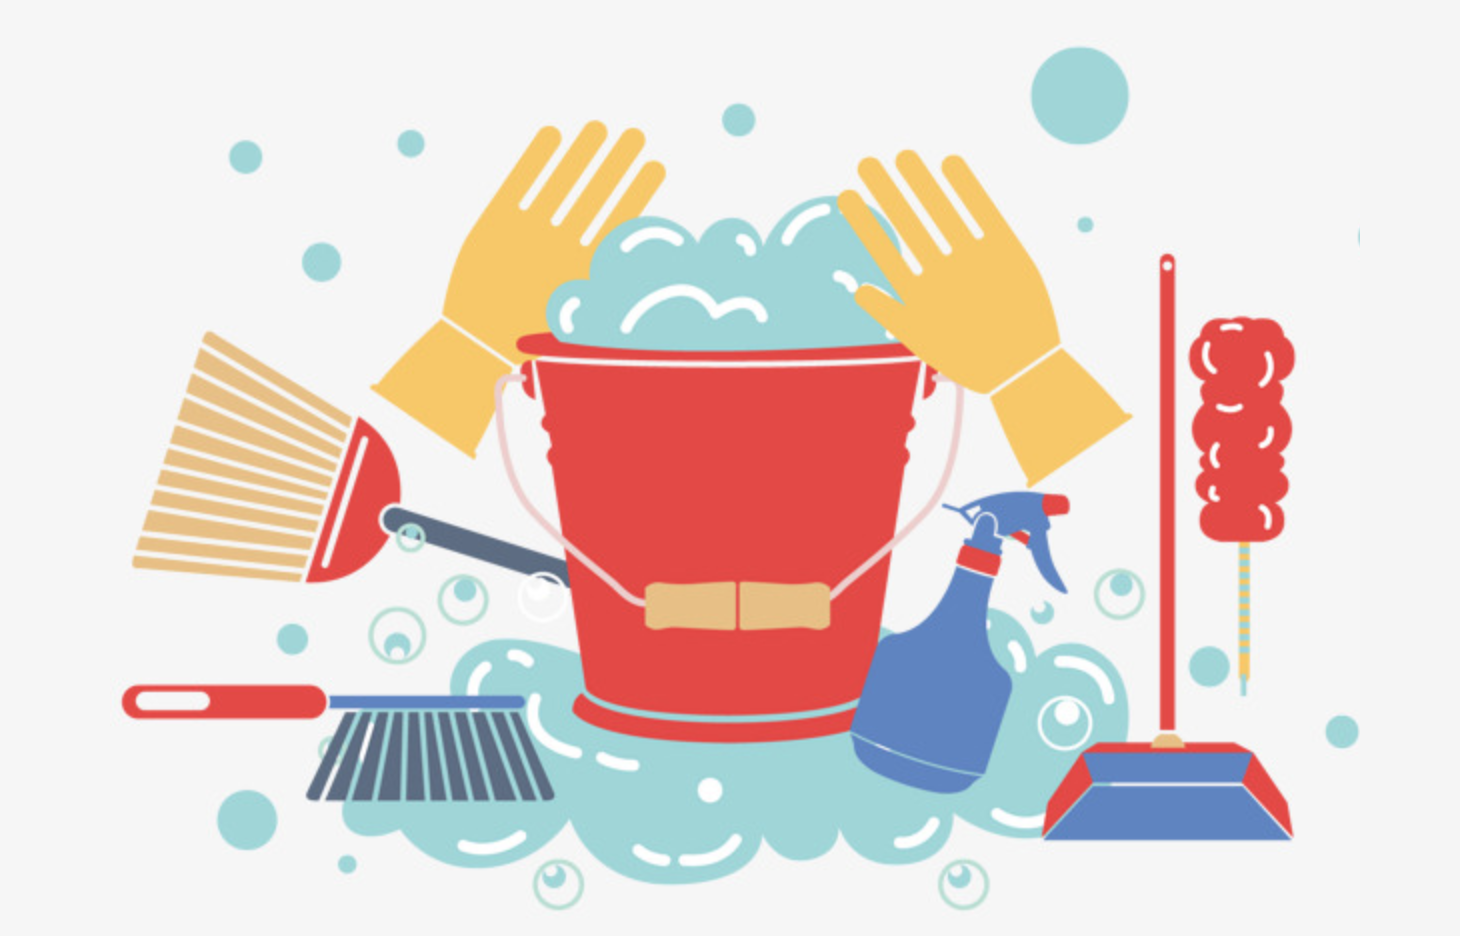 Why is a Tech Startup Blogging about Spring Cleaning?